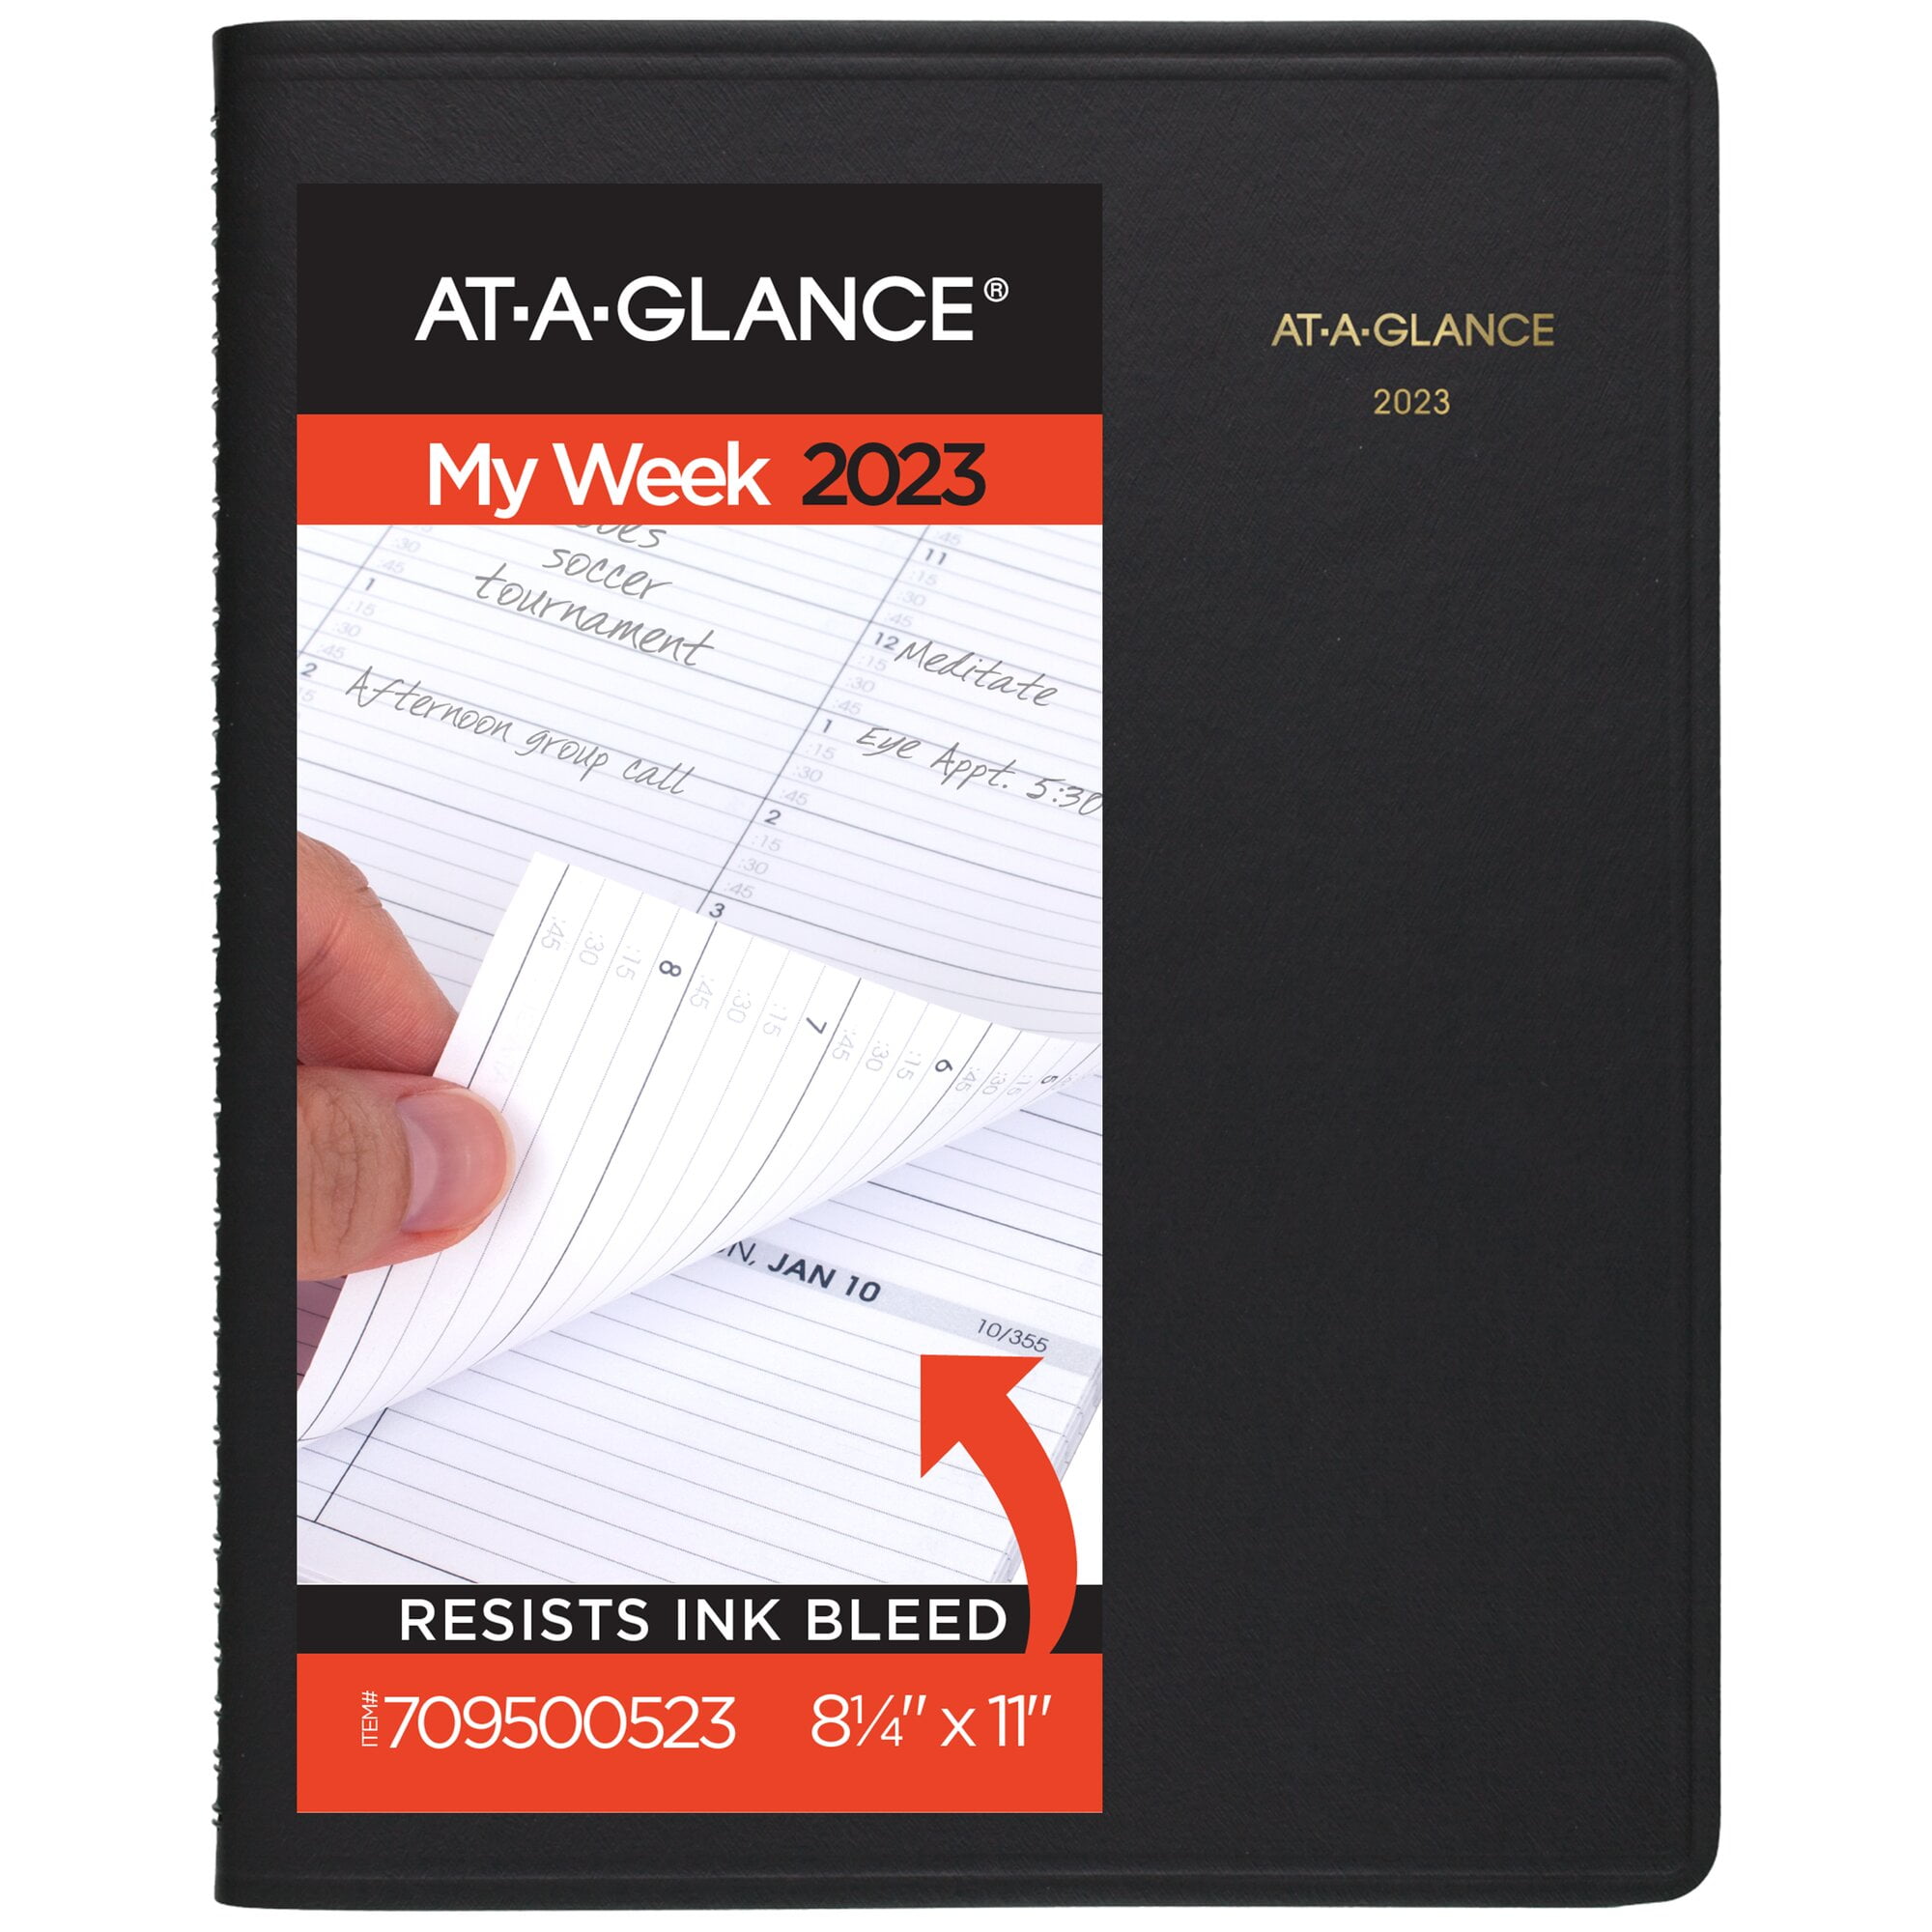 At-A-Glance 2023 Weekly Appointment Book Planner, Black, Large, 8 1/4 X  11 - Walmart.com